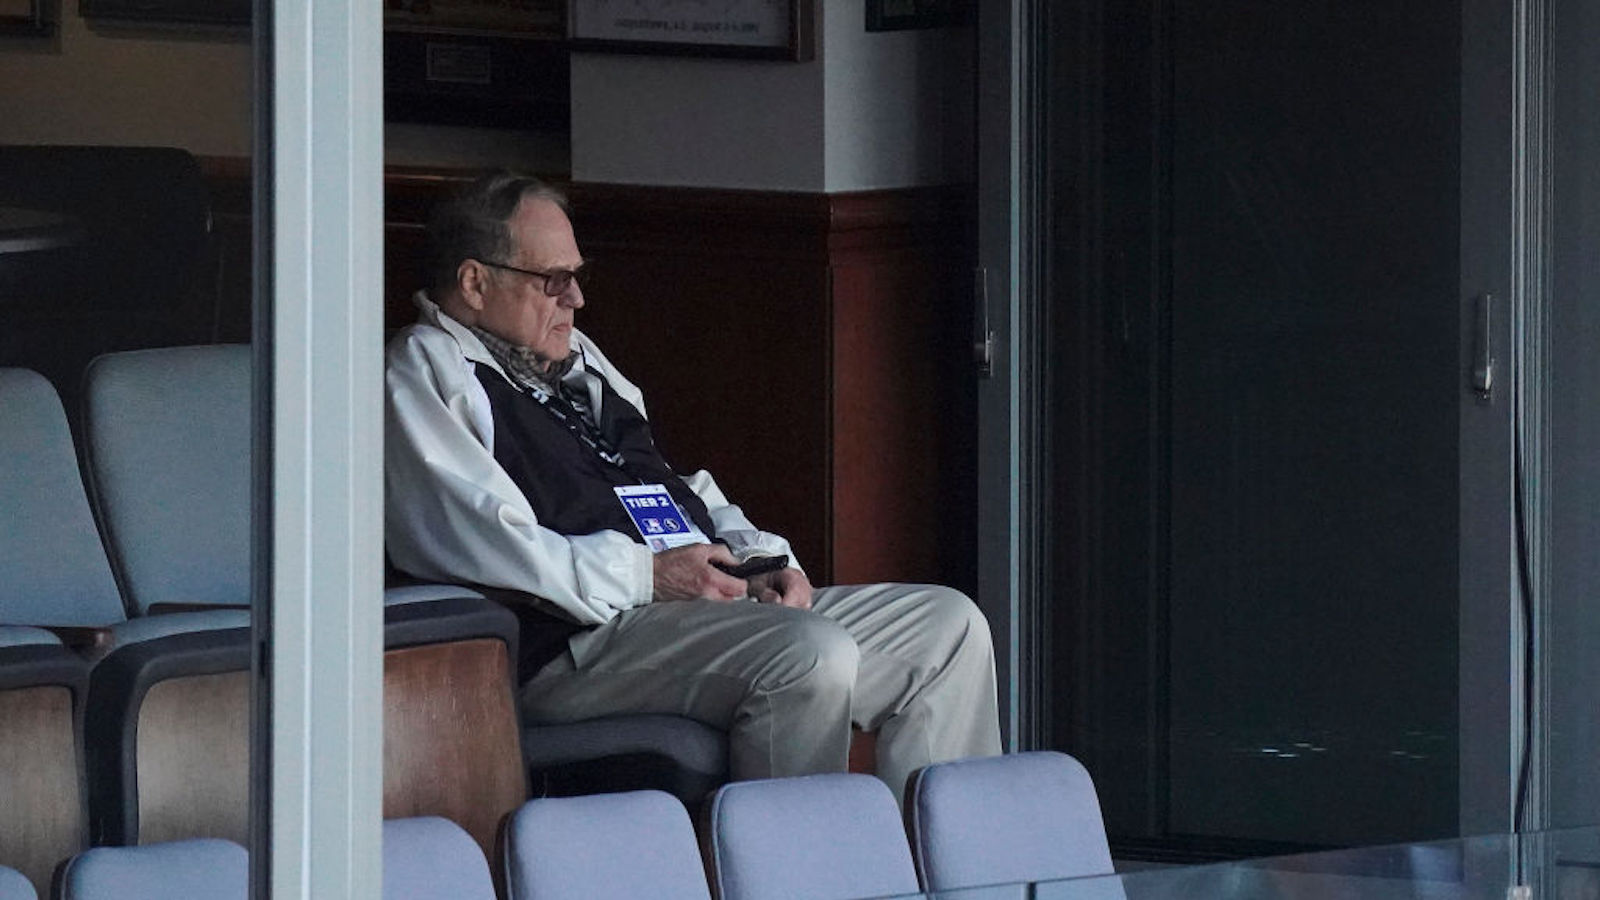 Chairman Jerry Reinsdorf of the Chicago White Sox watches his team play against the Cleveland Indians at Guaranteed Rate Field on May 01, 2021 in Chicago, Illinois.